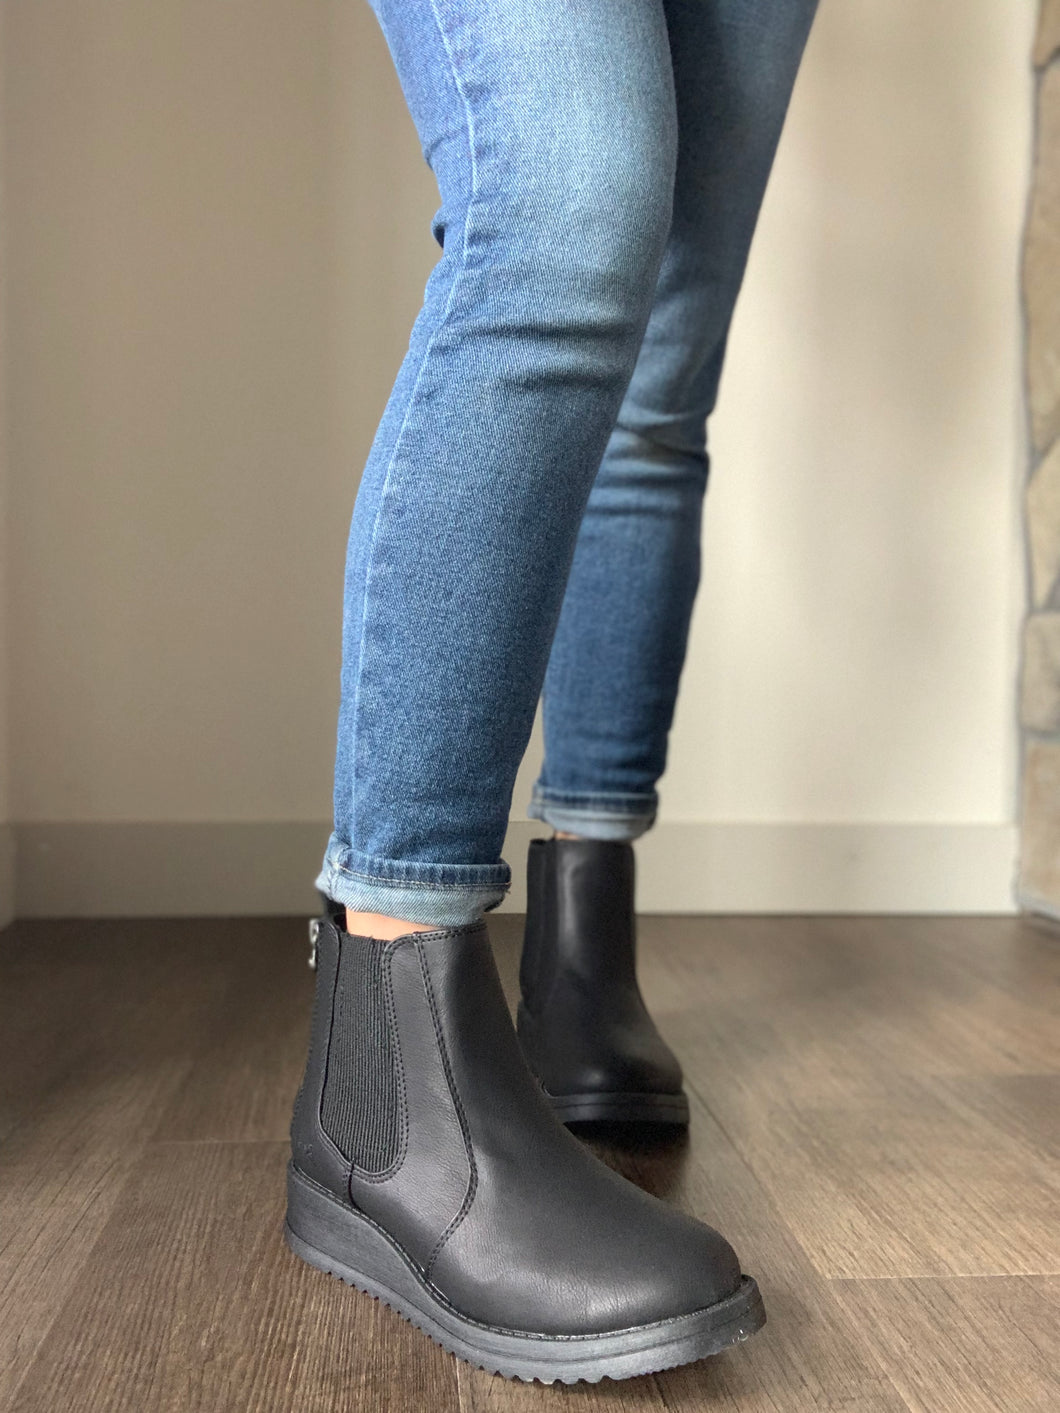 blowfish black chelsea boot with wedge